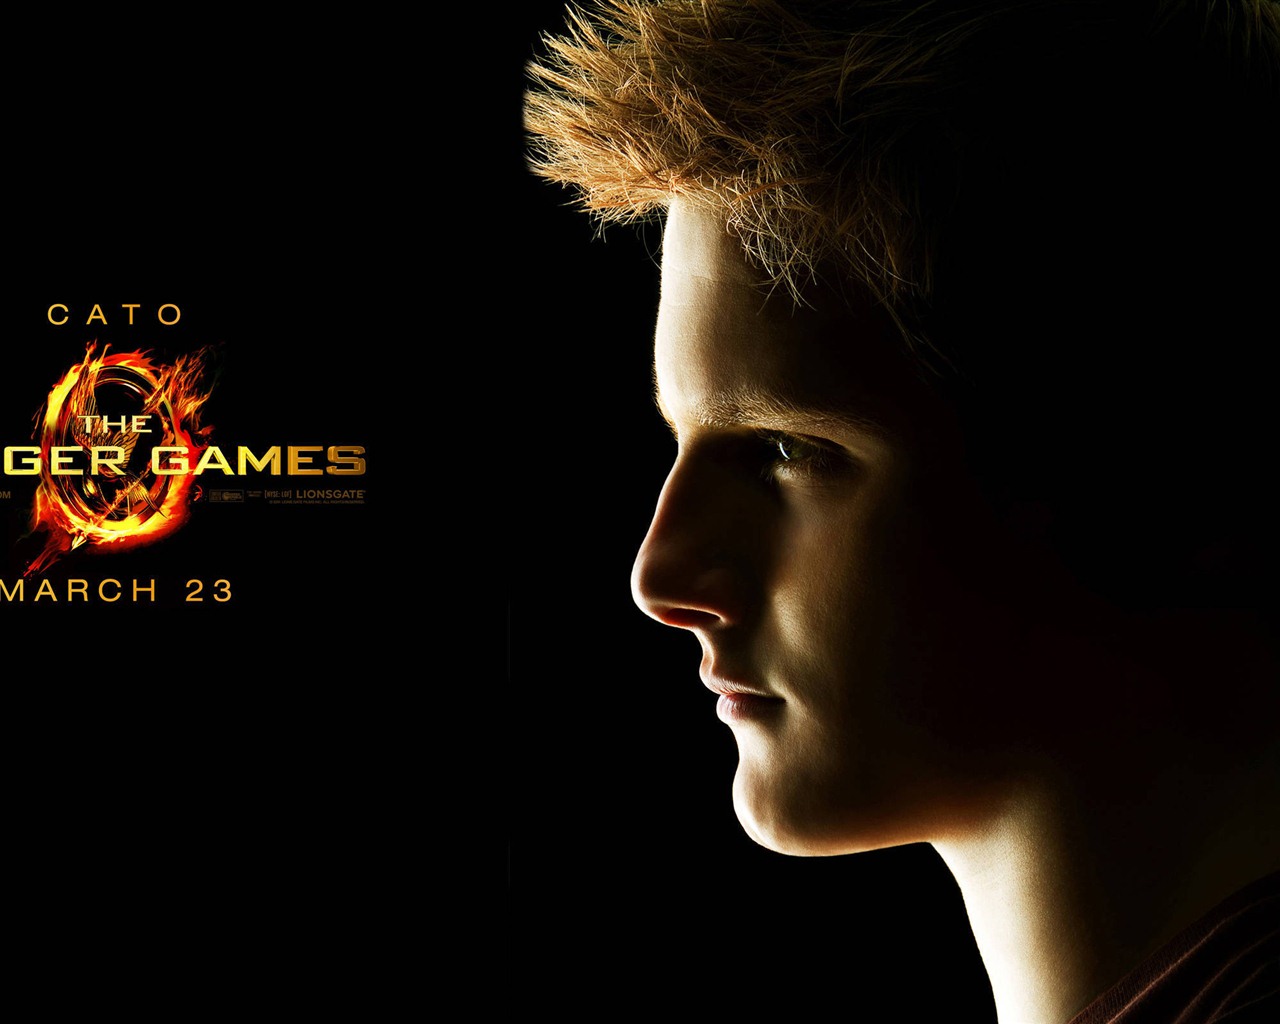 The Hunger Games HD wallpapers #3 - 1280x1024